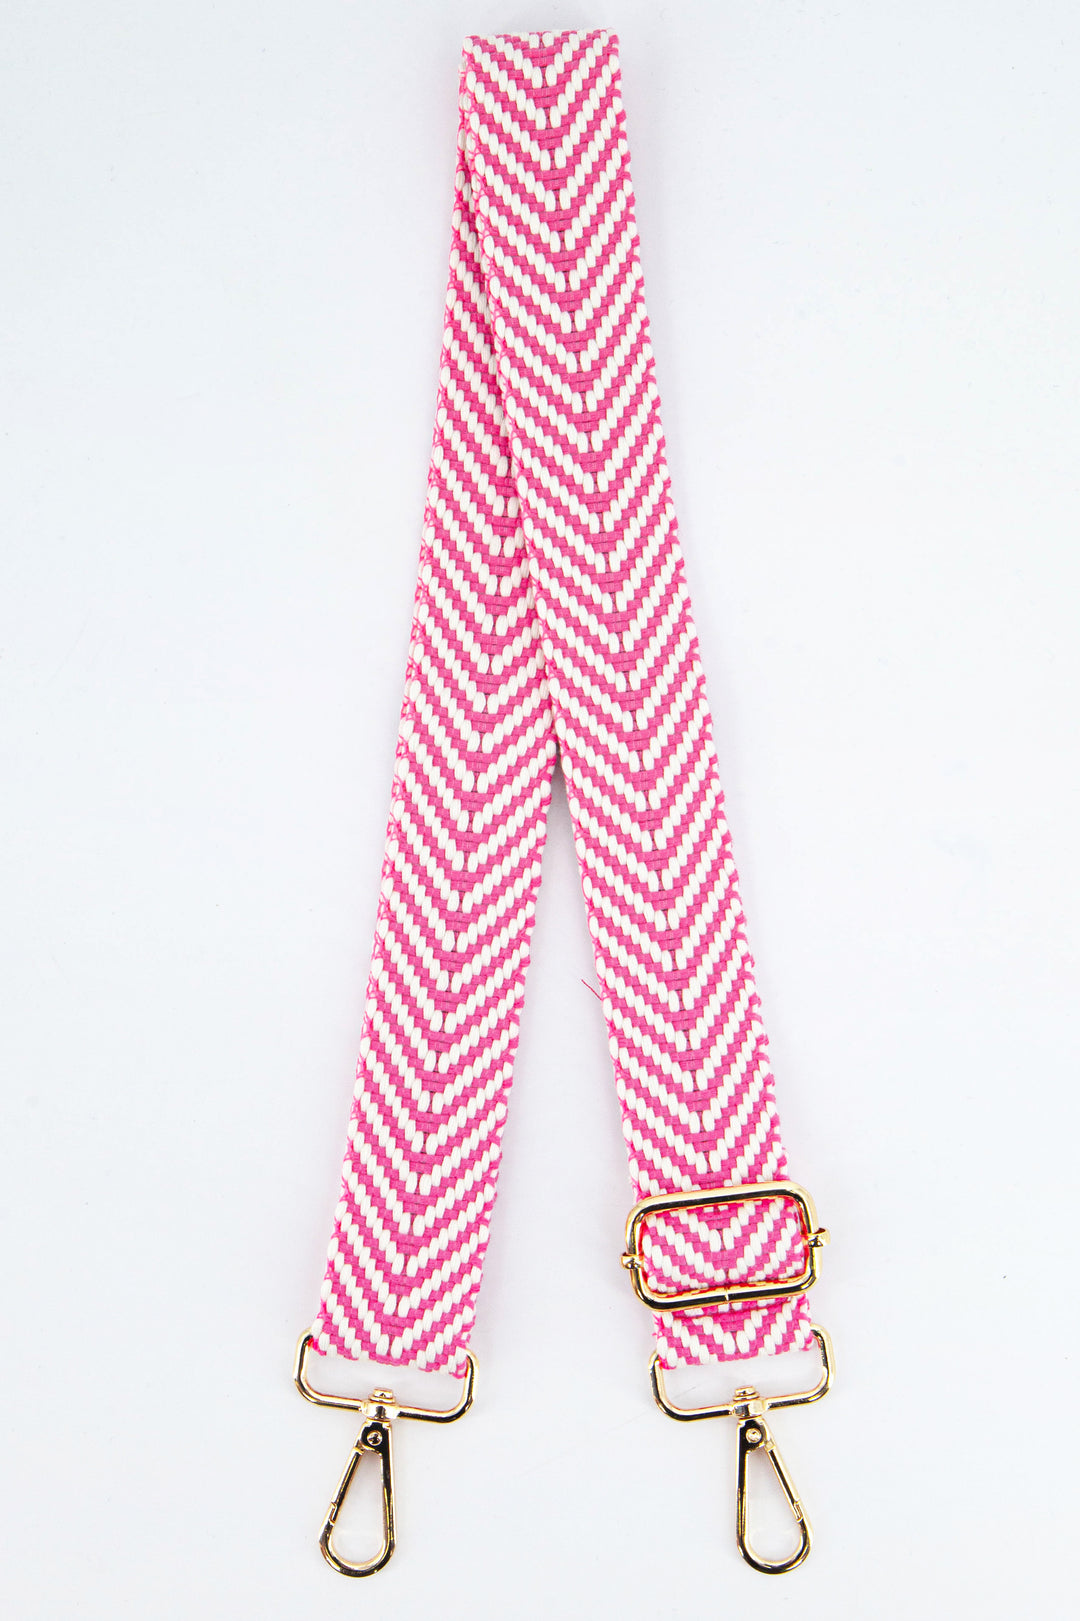 hot pink and white chevron pattern woven bag strap with gold clip on snap hook attachments